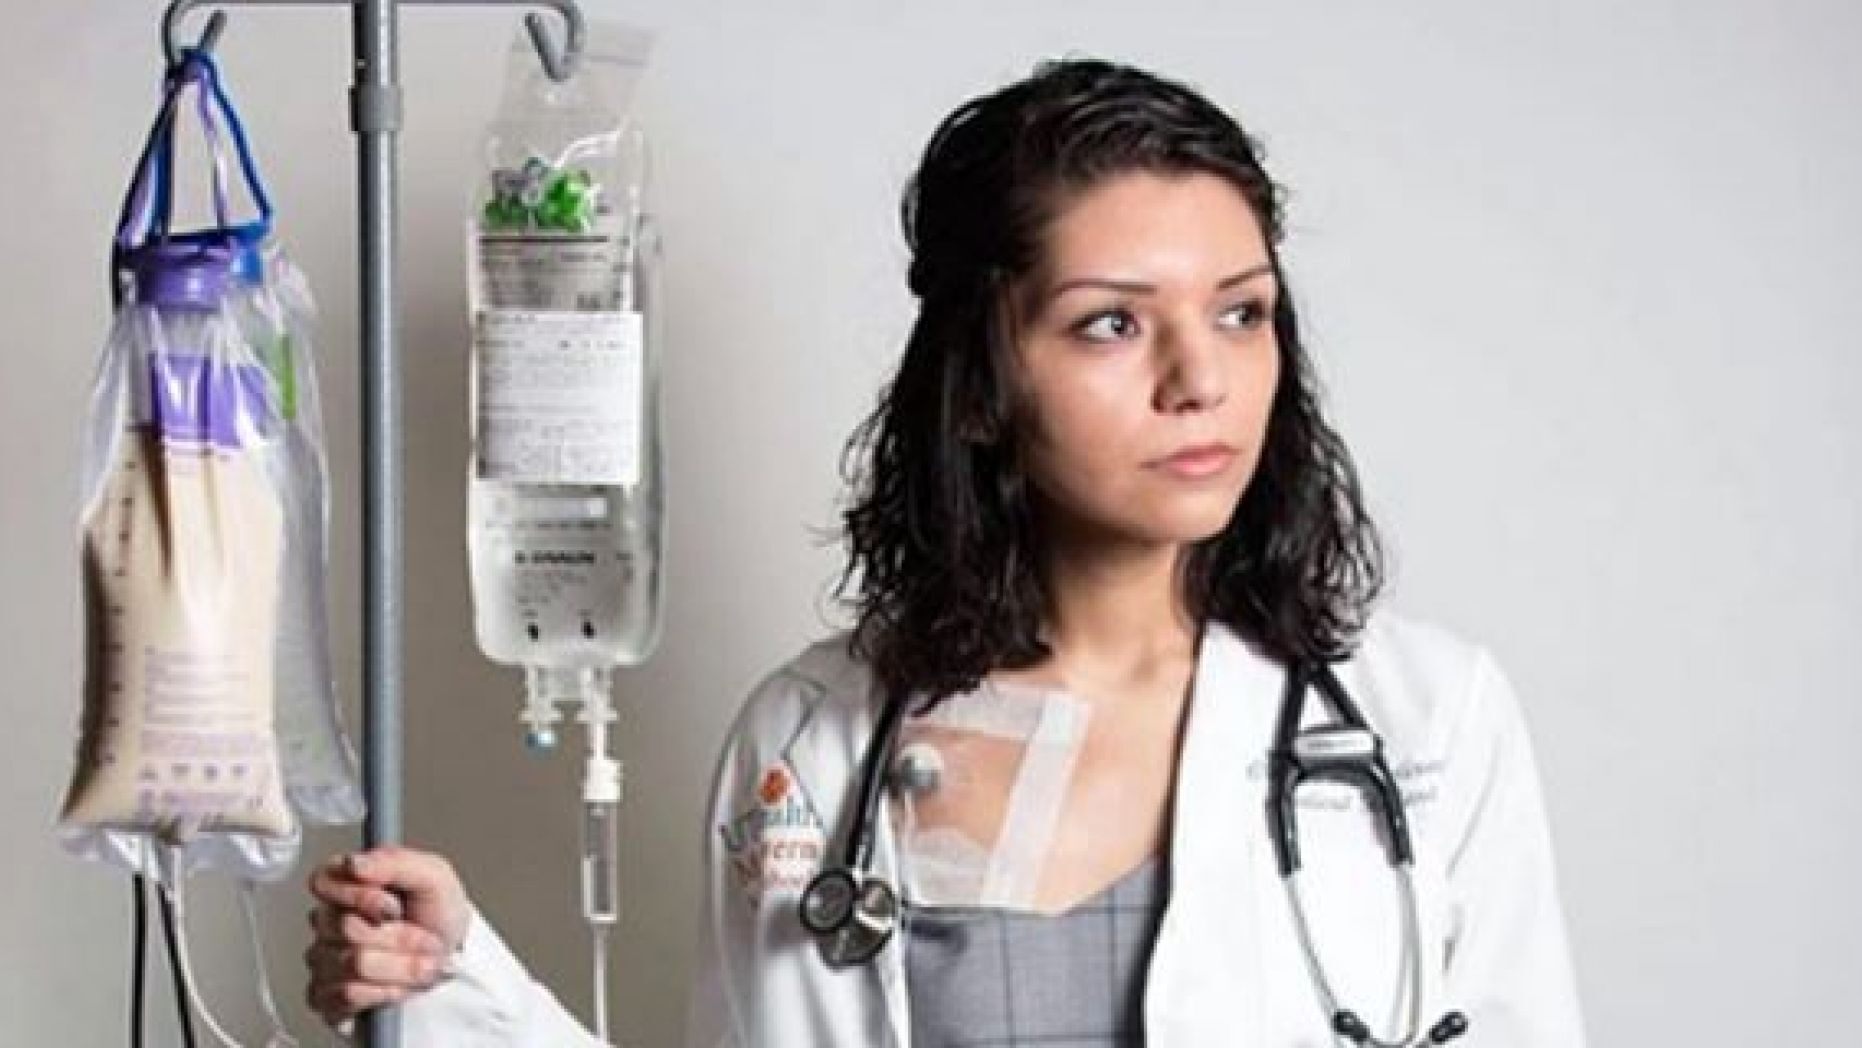 Claudia Martinez, 28, of Houston, Texas is now in her fourth year at the University of Texas Health McGovern Medical School, both as a medical student and patient.